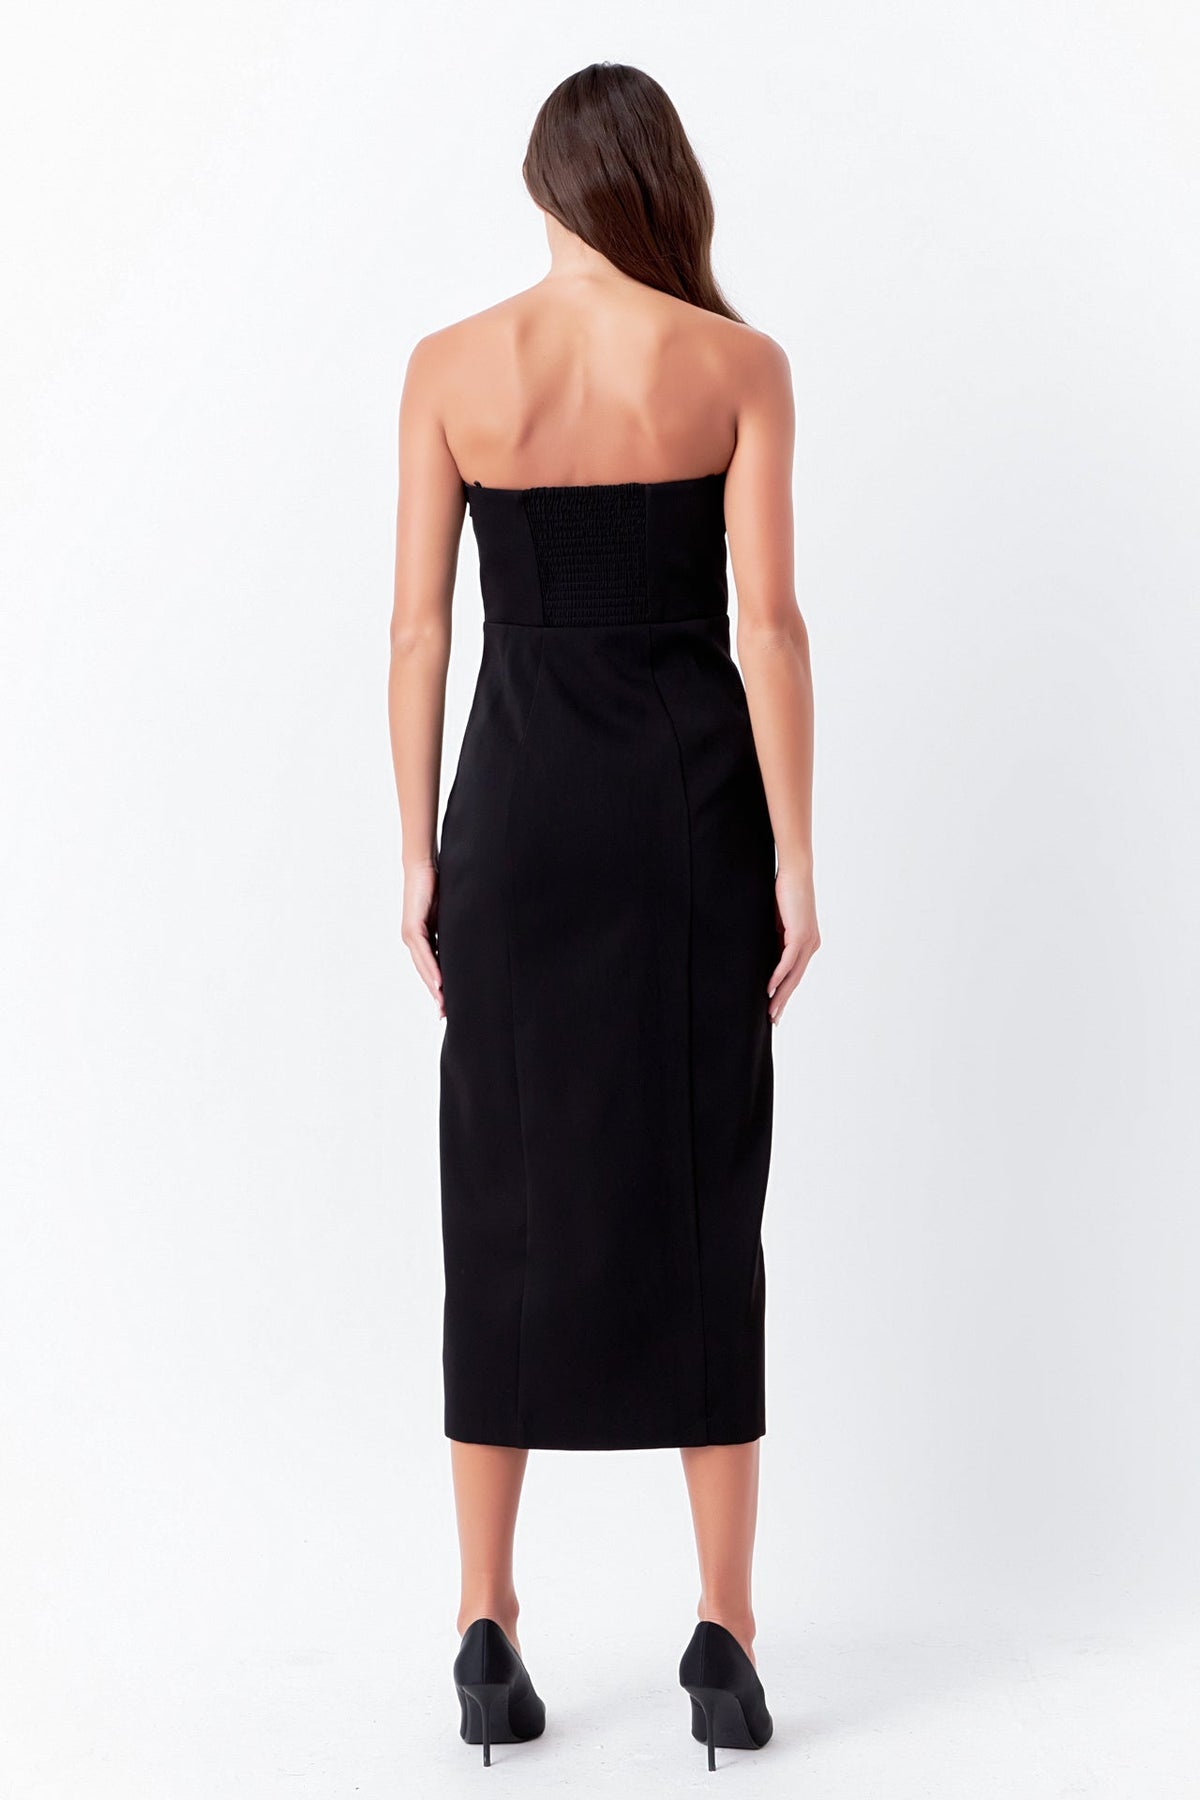 ENDLESS ROSE-Strapless Midi Dress-DRESSES available at Objectrare